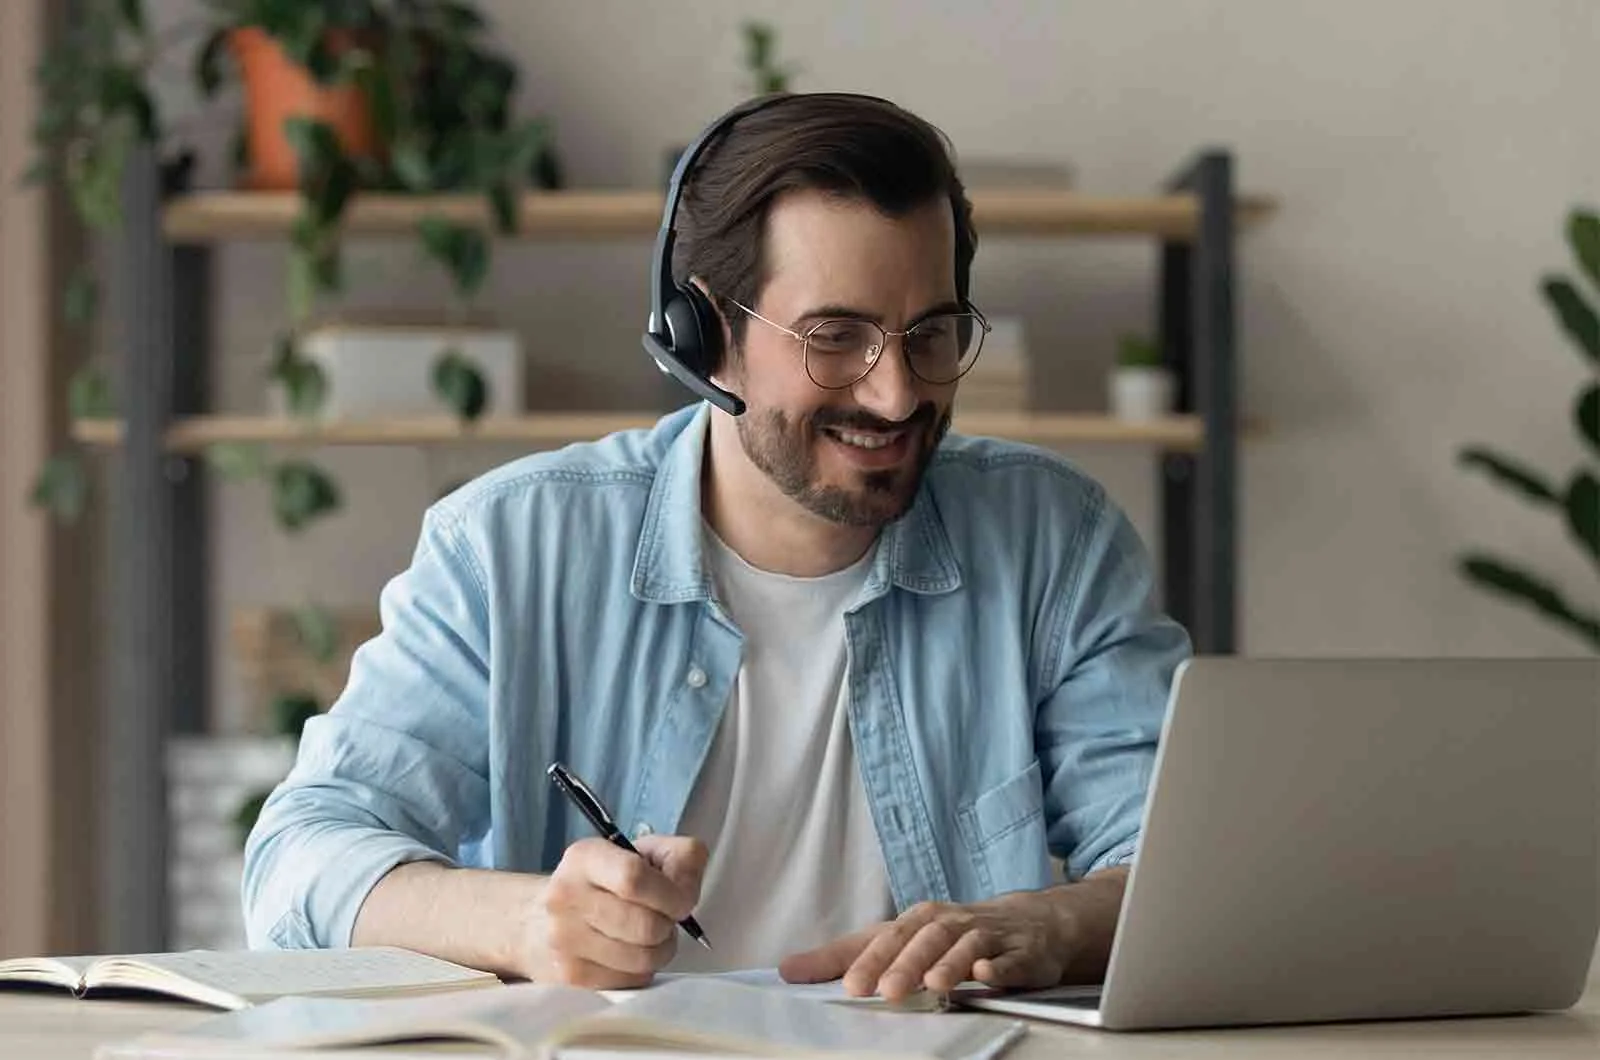 A man with headphones smiling, taking notes and using laptop. Concept of language skills and development.